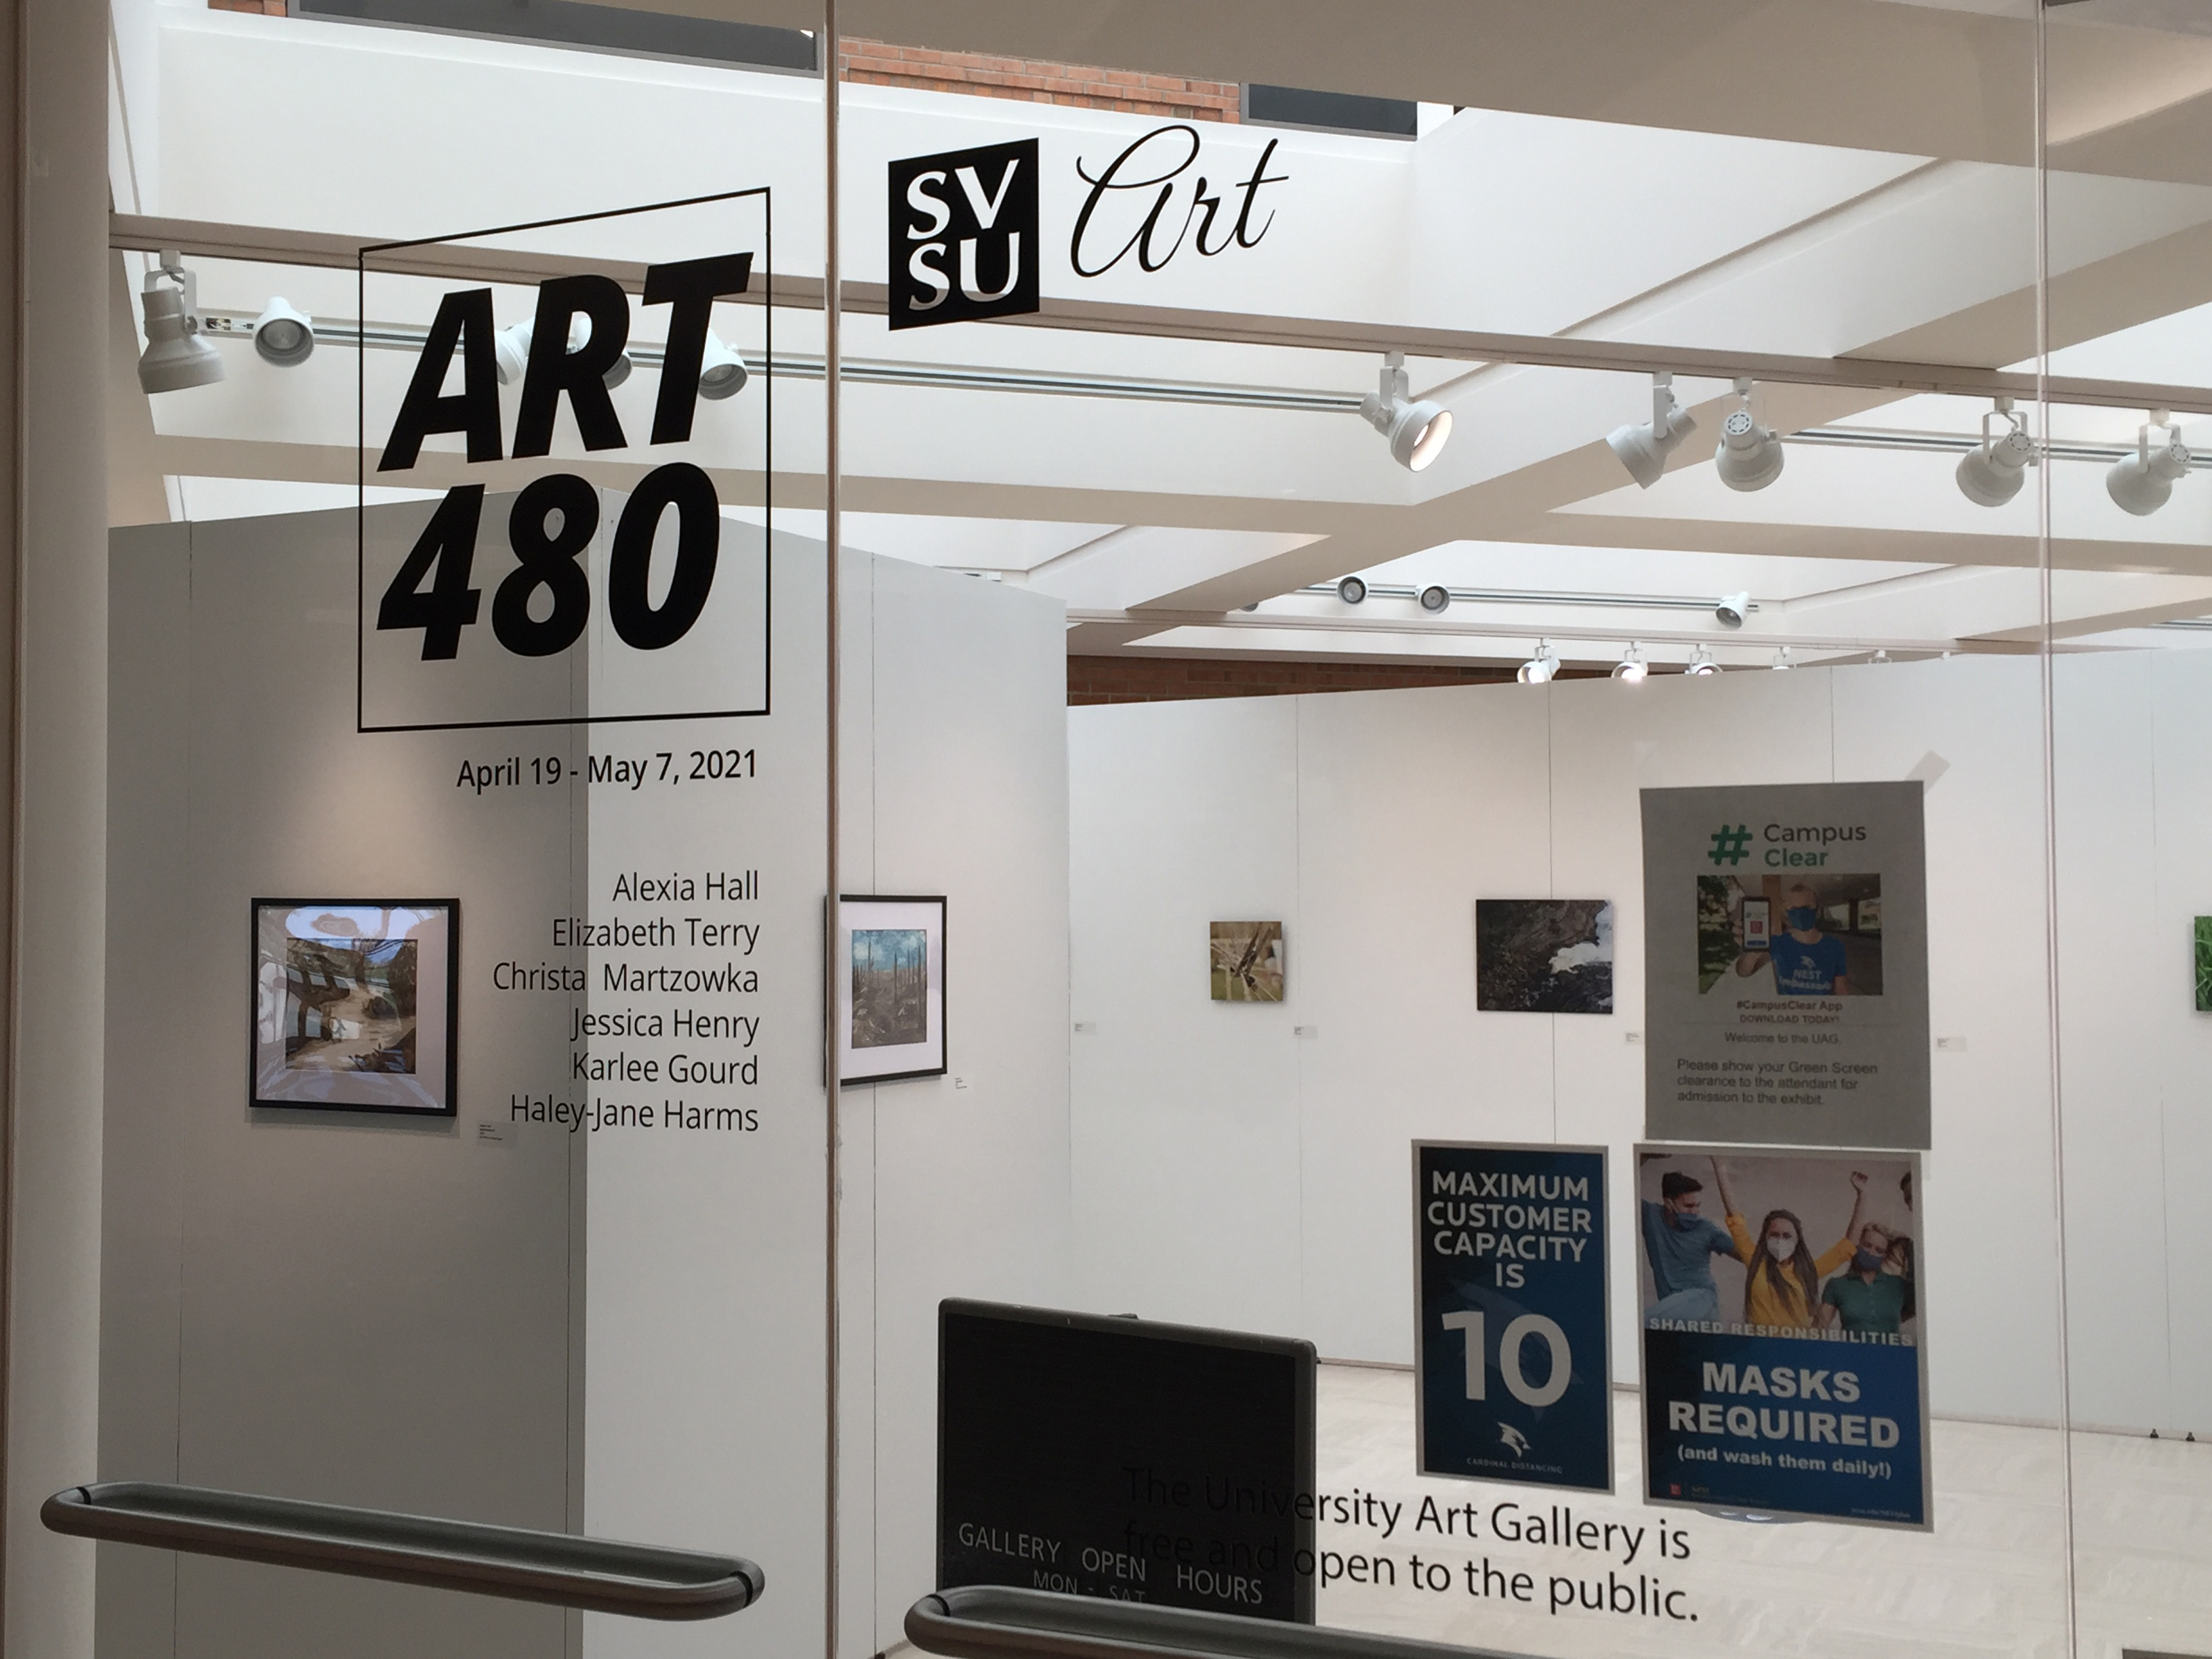 The art 480 banner on the glass with student participant names and artwork in the background